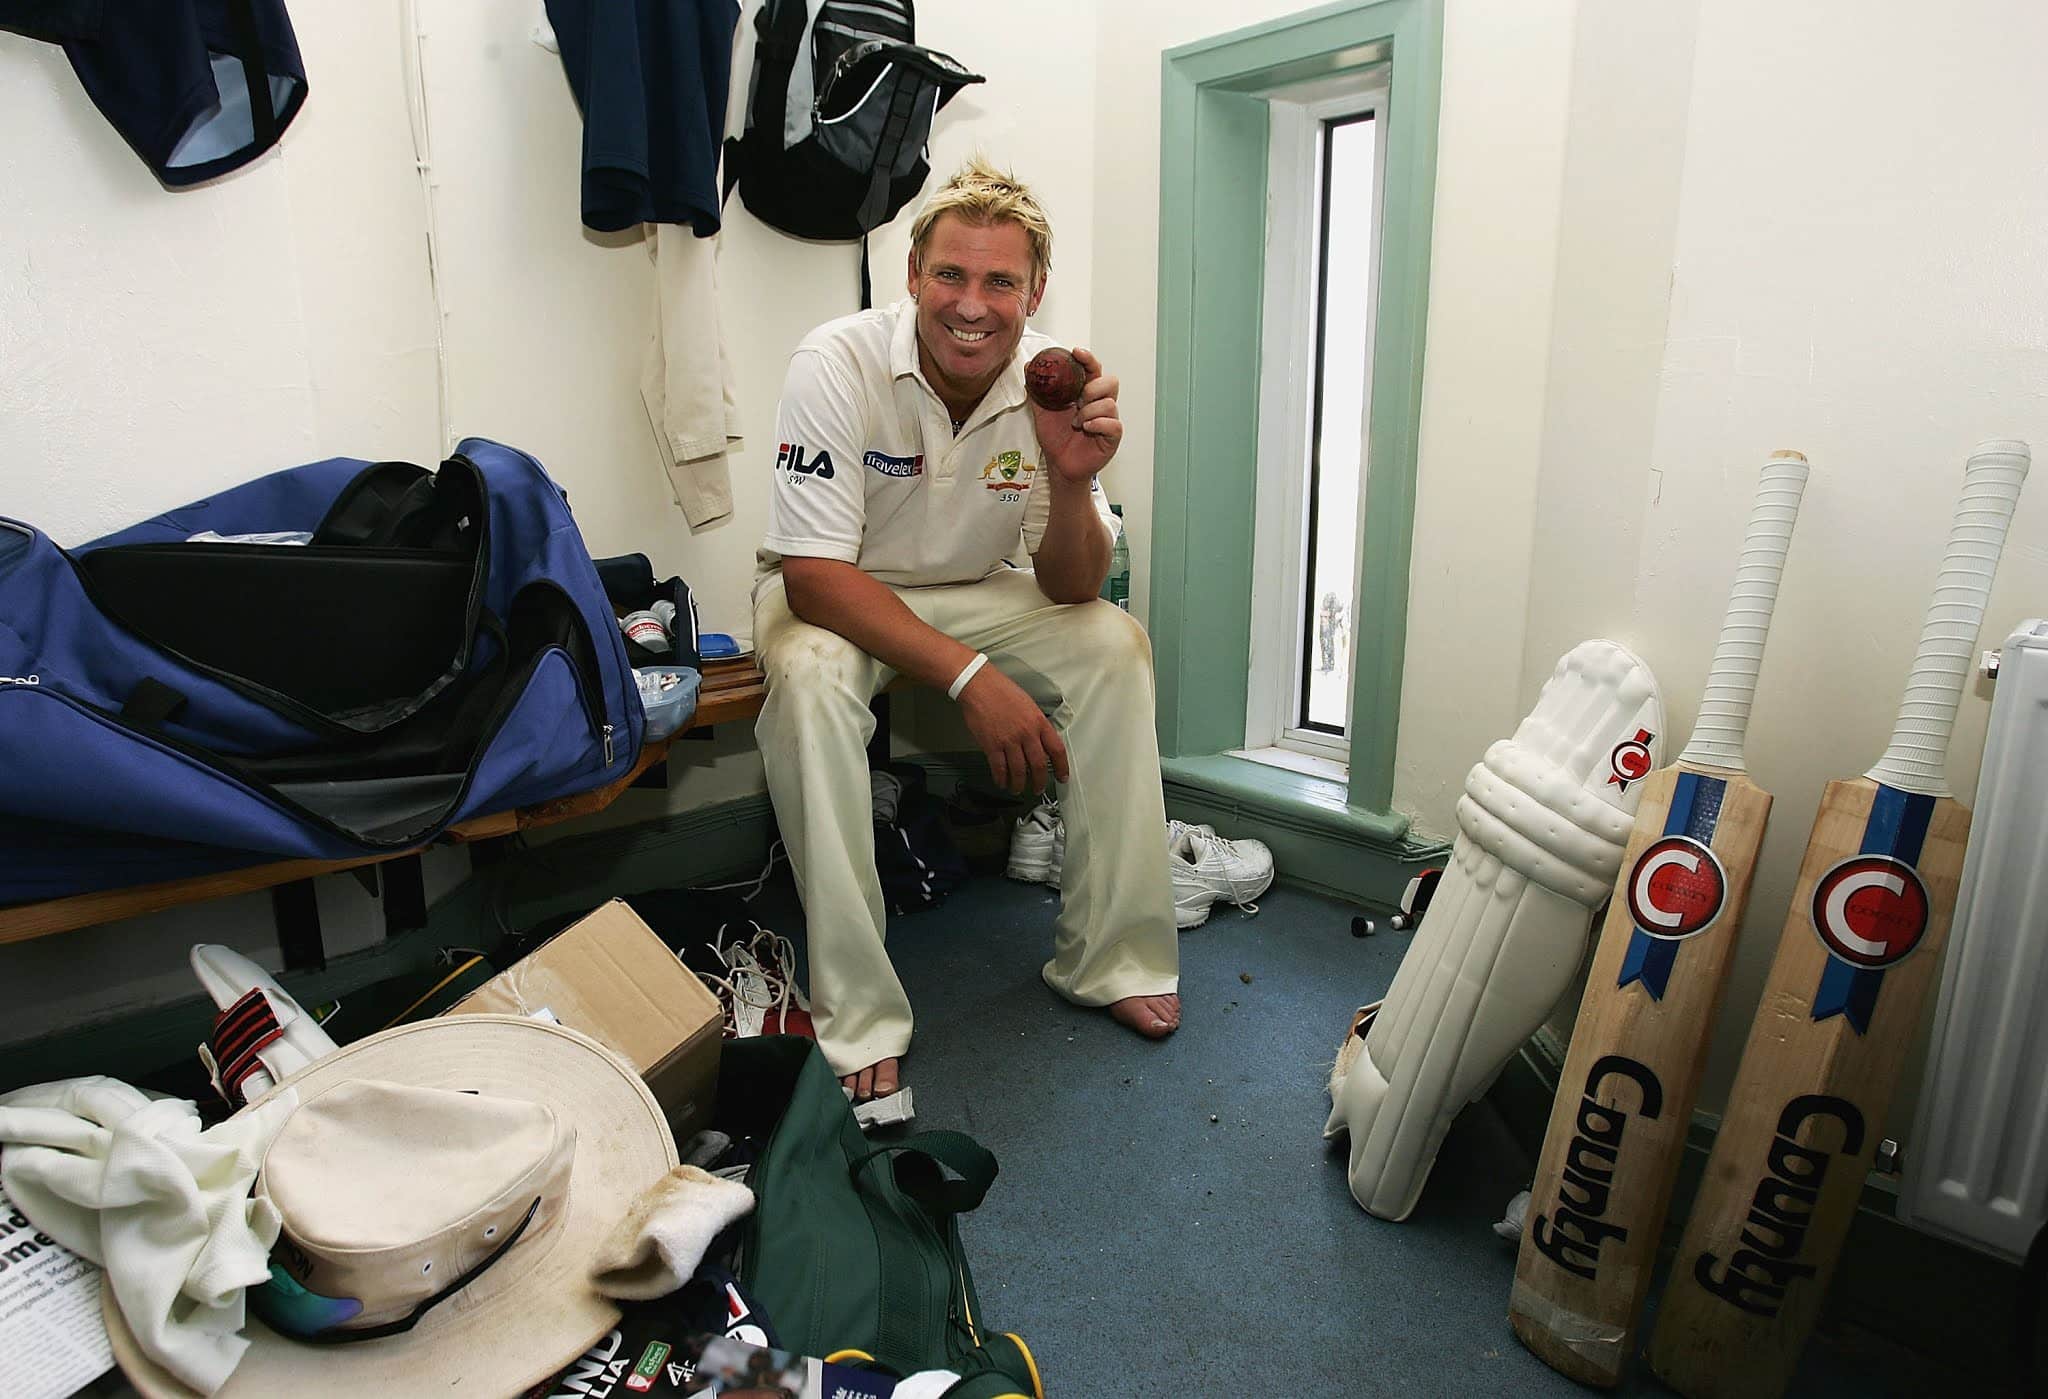 #OTD in 2005: Shane Warne became the first bowler to grab 600 wickets in Test Cricket